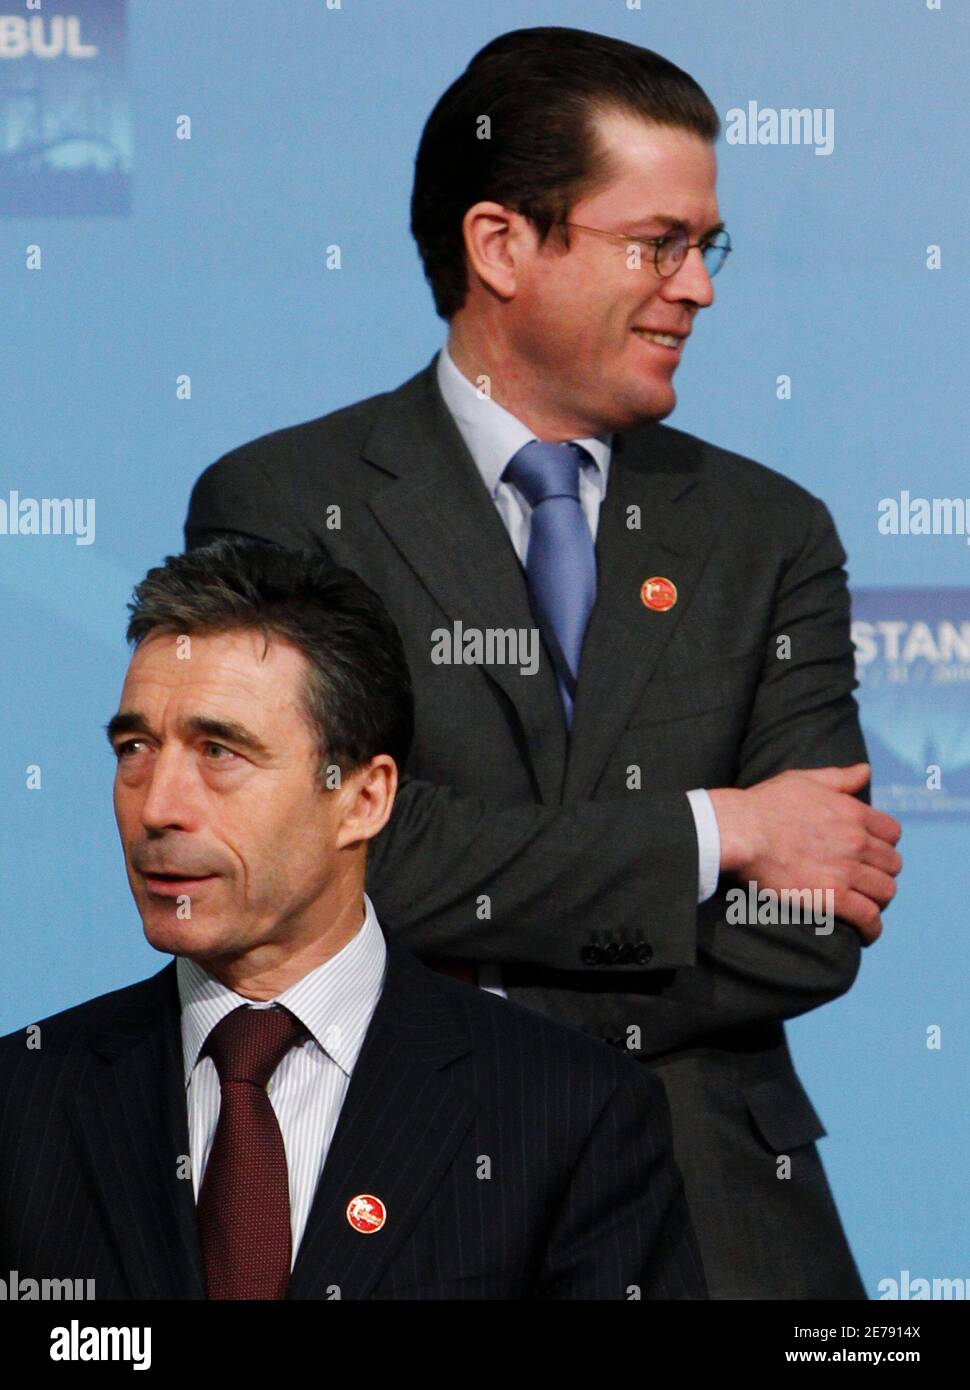 NATO Secretary-General Anders Fogh Rasmussen and Germany's Defence Minister Karl-Theodor zu Guttenberg (back) stand for a group photo during the Informal meeting of NATO Defence Ministers in Istanbul February 5, 2010.  REUTERS/Murad Sezer (TURKEY - Tags: POLITICS) Stock Photo